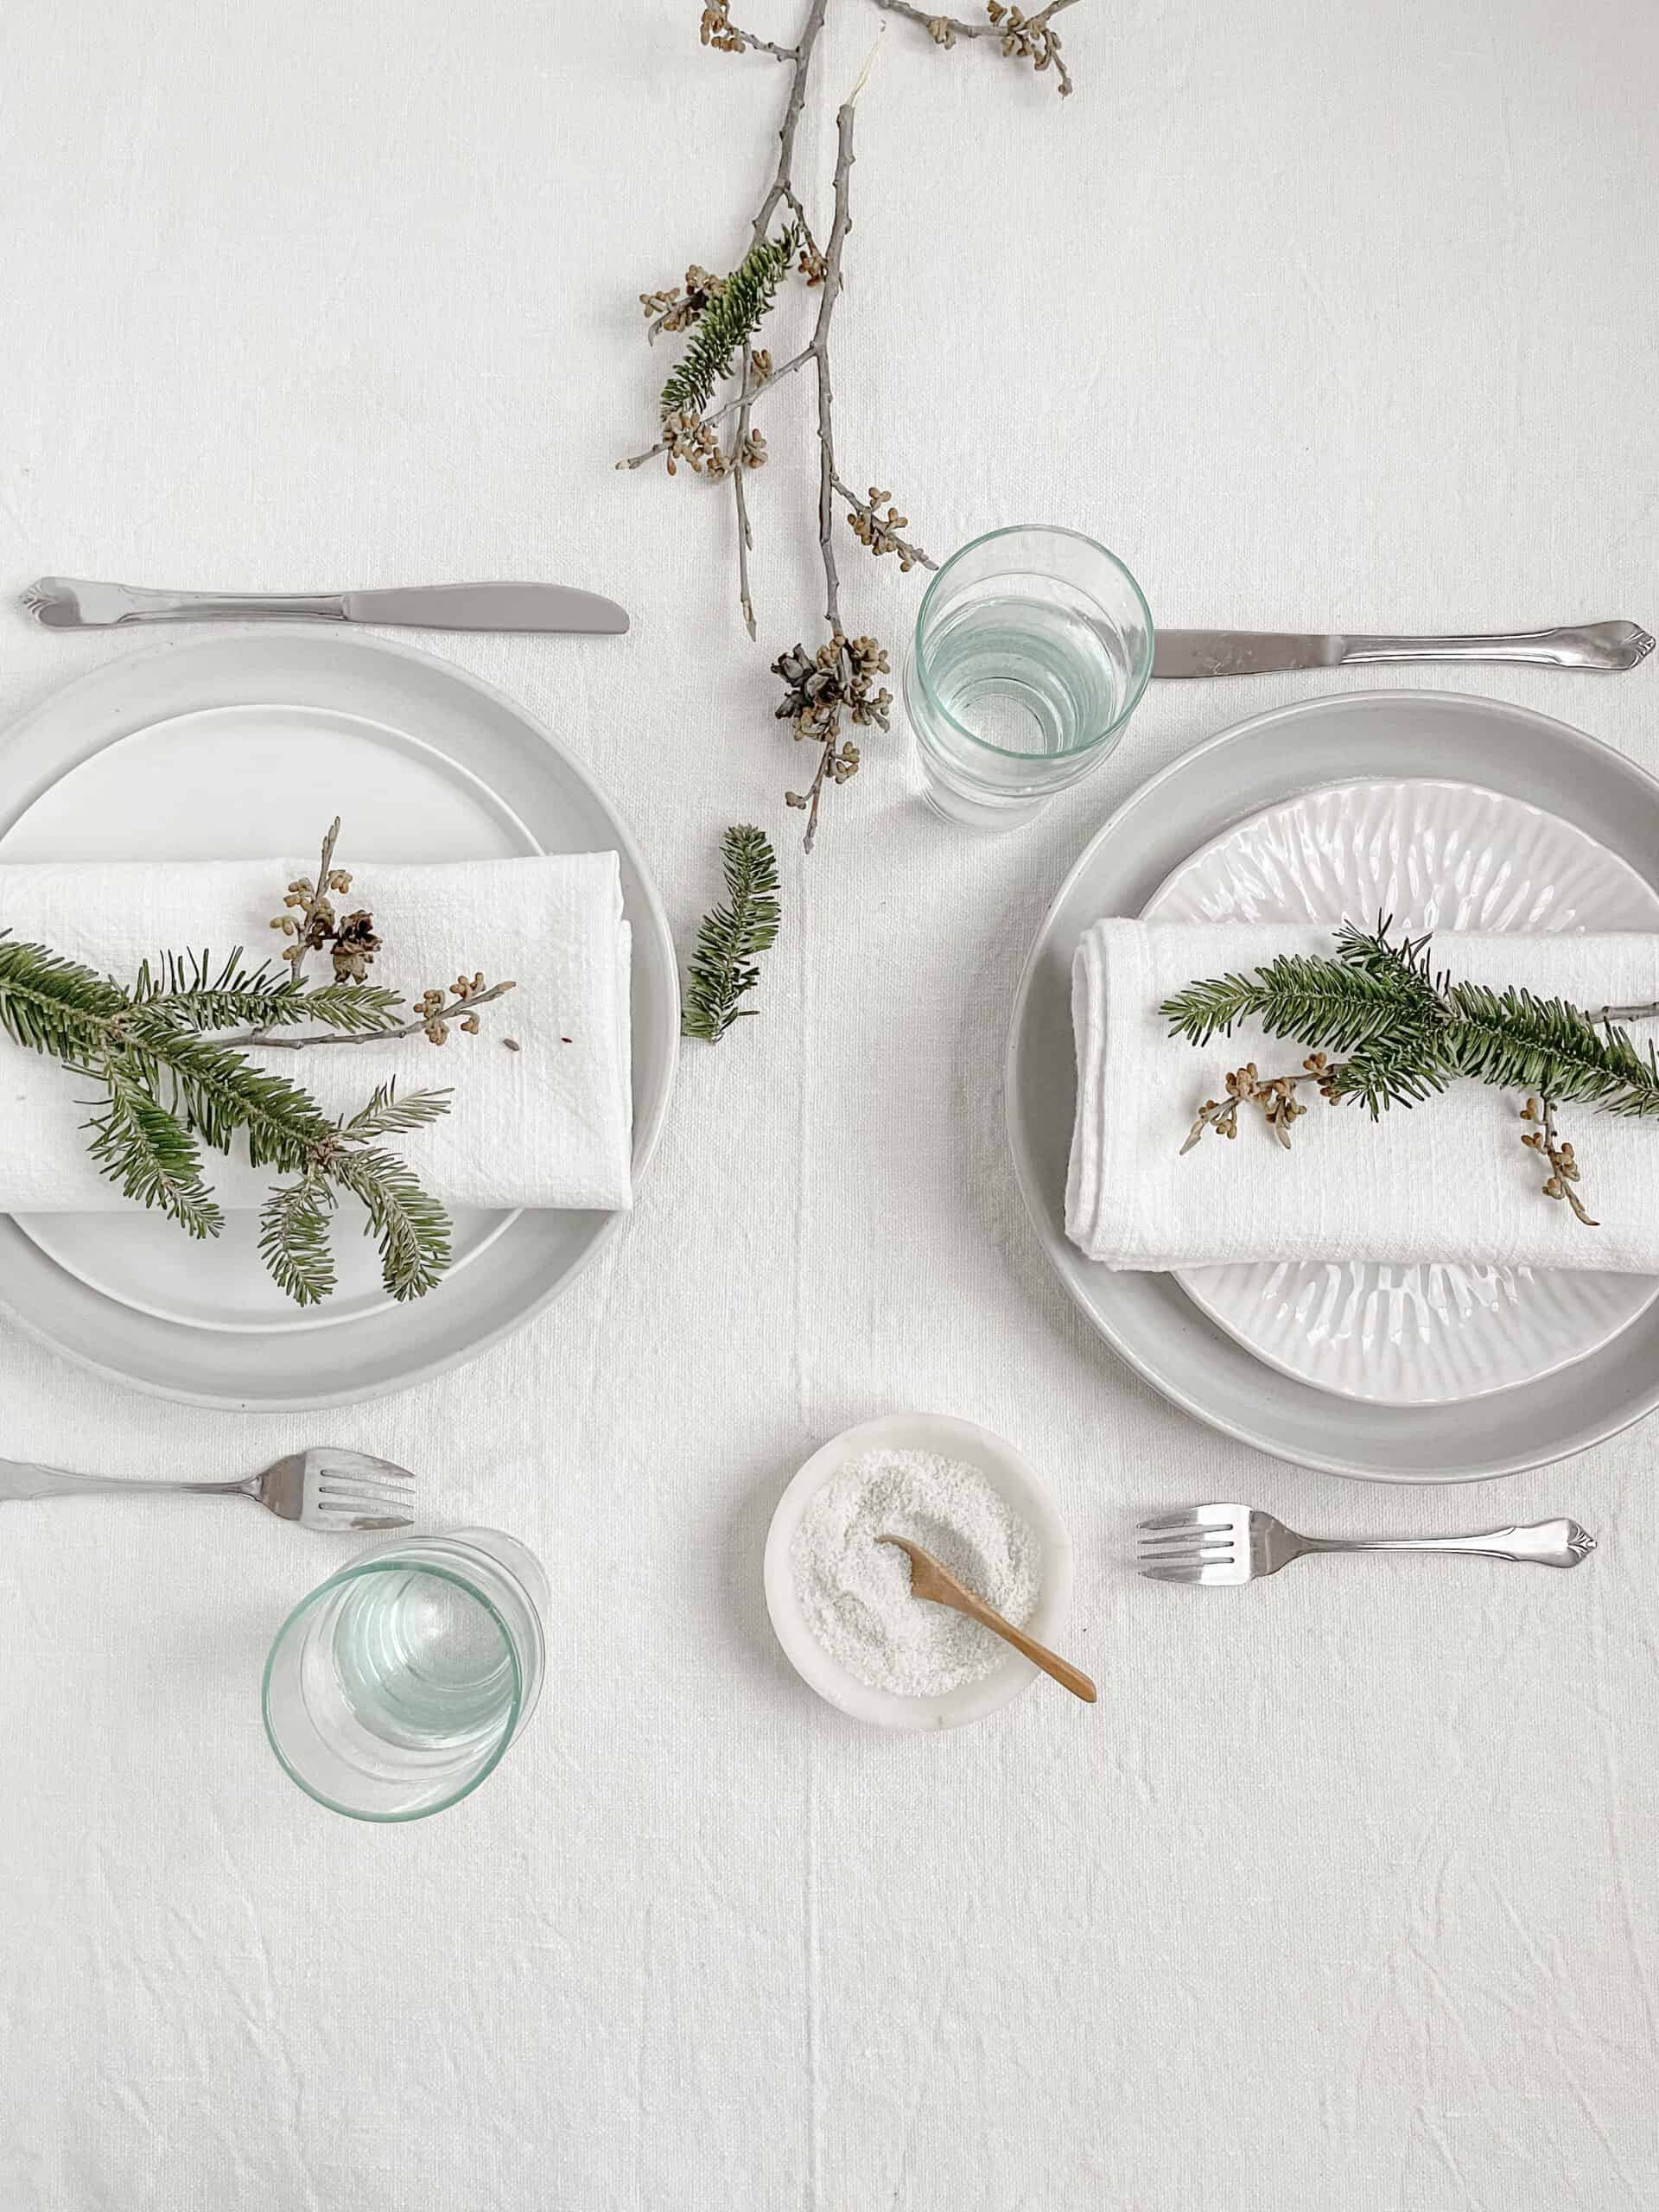 Two plates with silverware and two blue glasses on a white linen tablecloth. The table is decorated with branches and greens from nature.